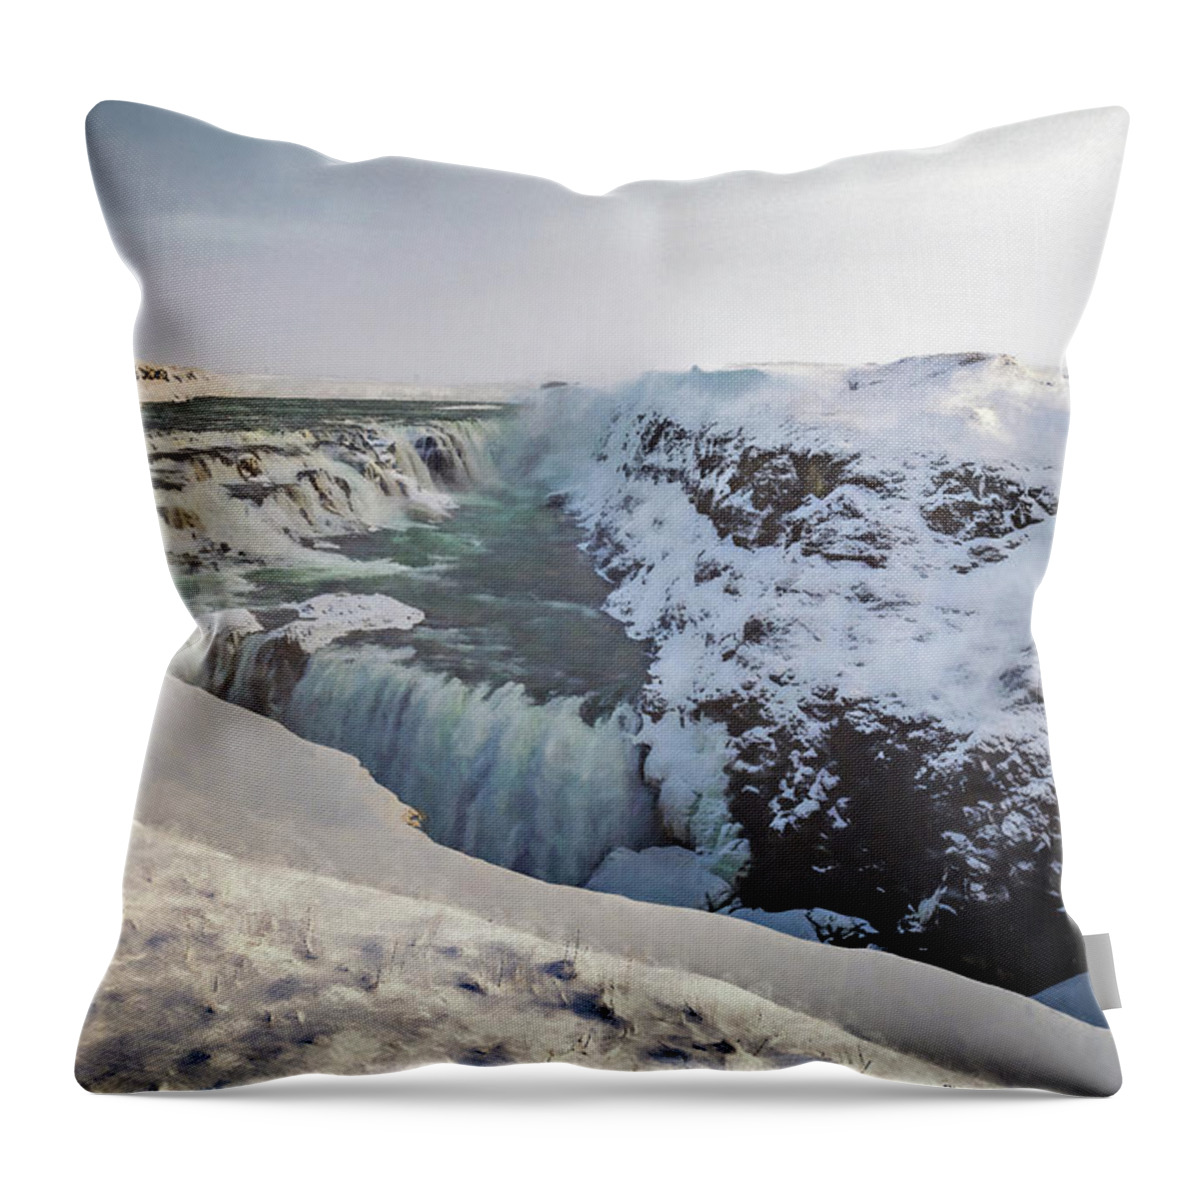 Arctic Throw Pillow featuring the photograph Frozen Waterfall by Maria Coulson